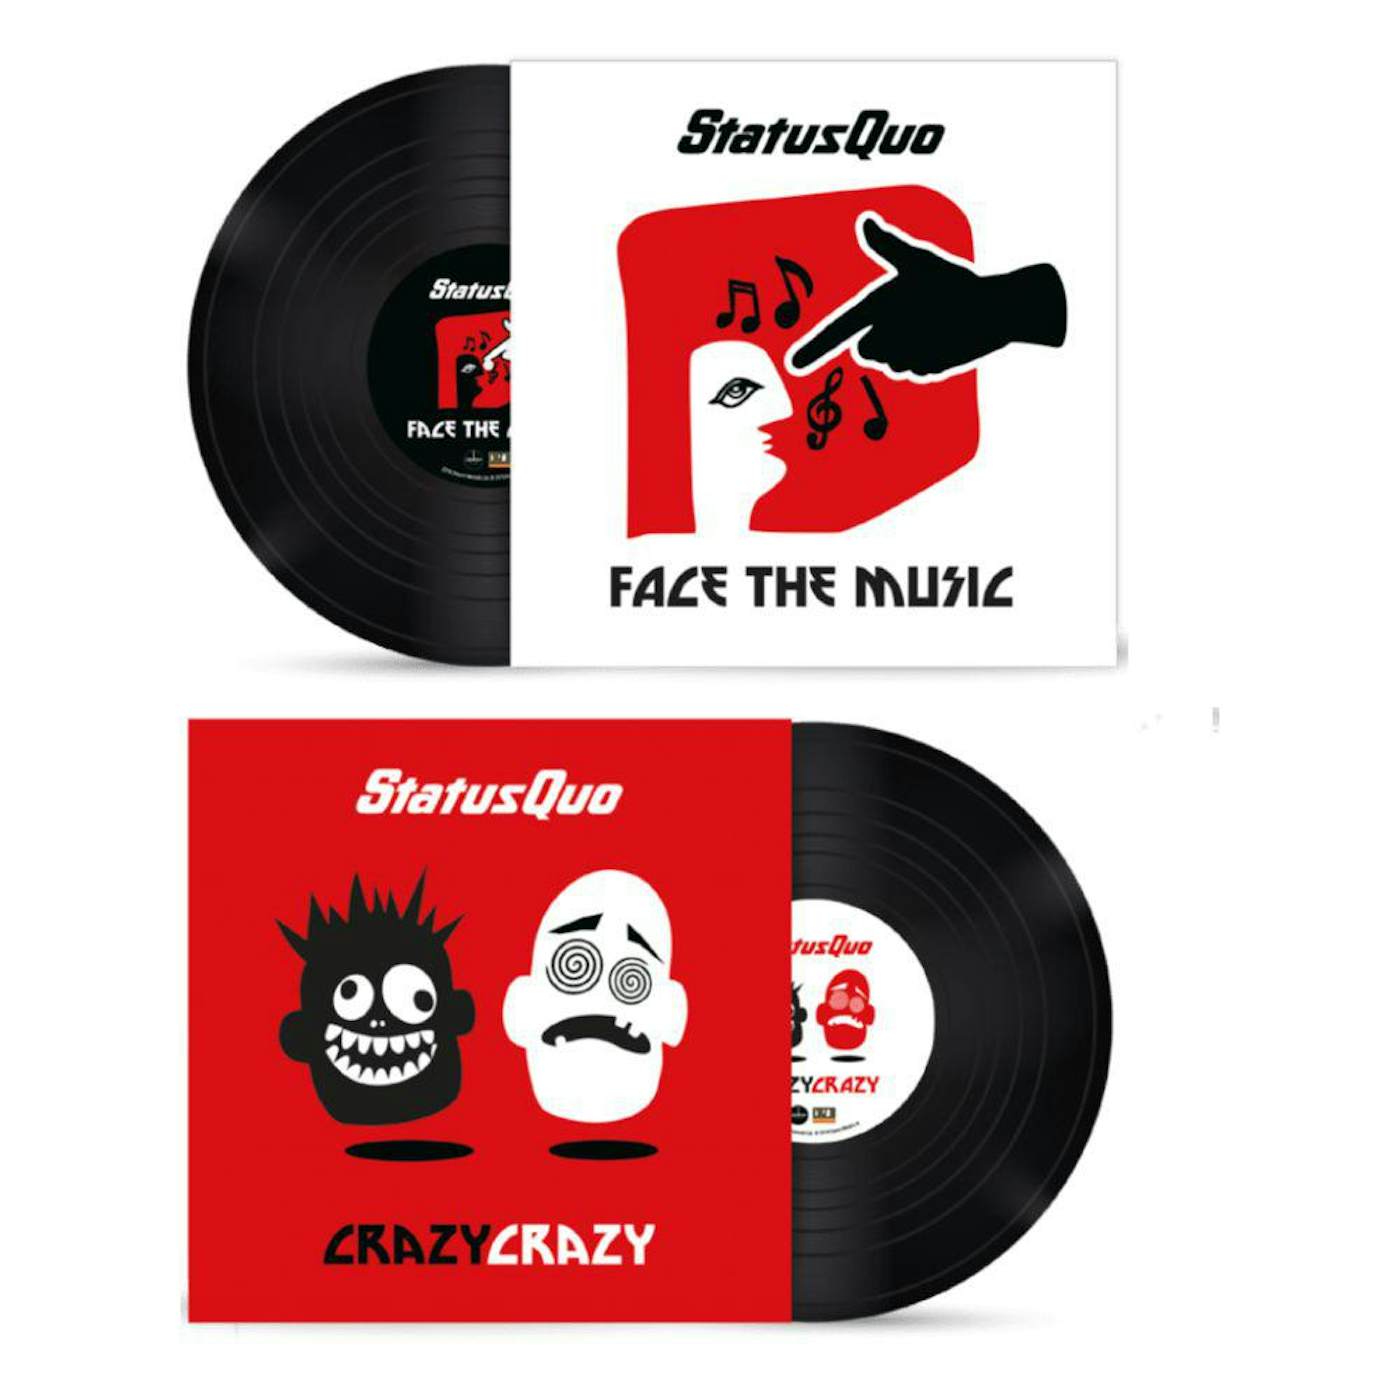 spor dosis Positiv Status Quo Crazy, Crazy / Face The Music (Single - 7" LP with Reversible  Sleeve) 7 Inch (Vinyl)